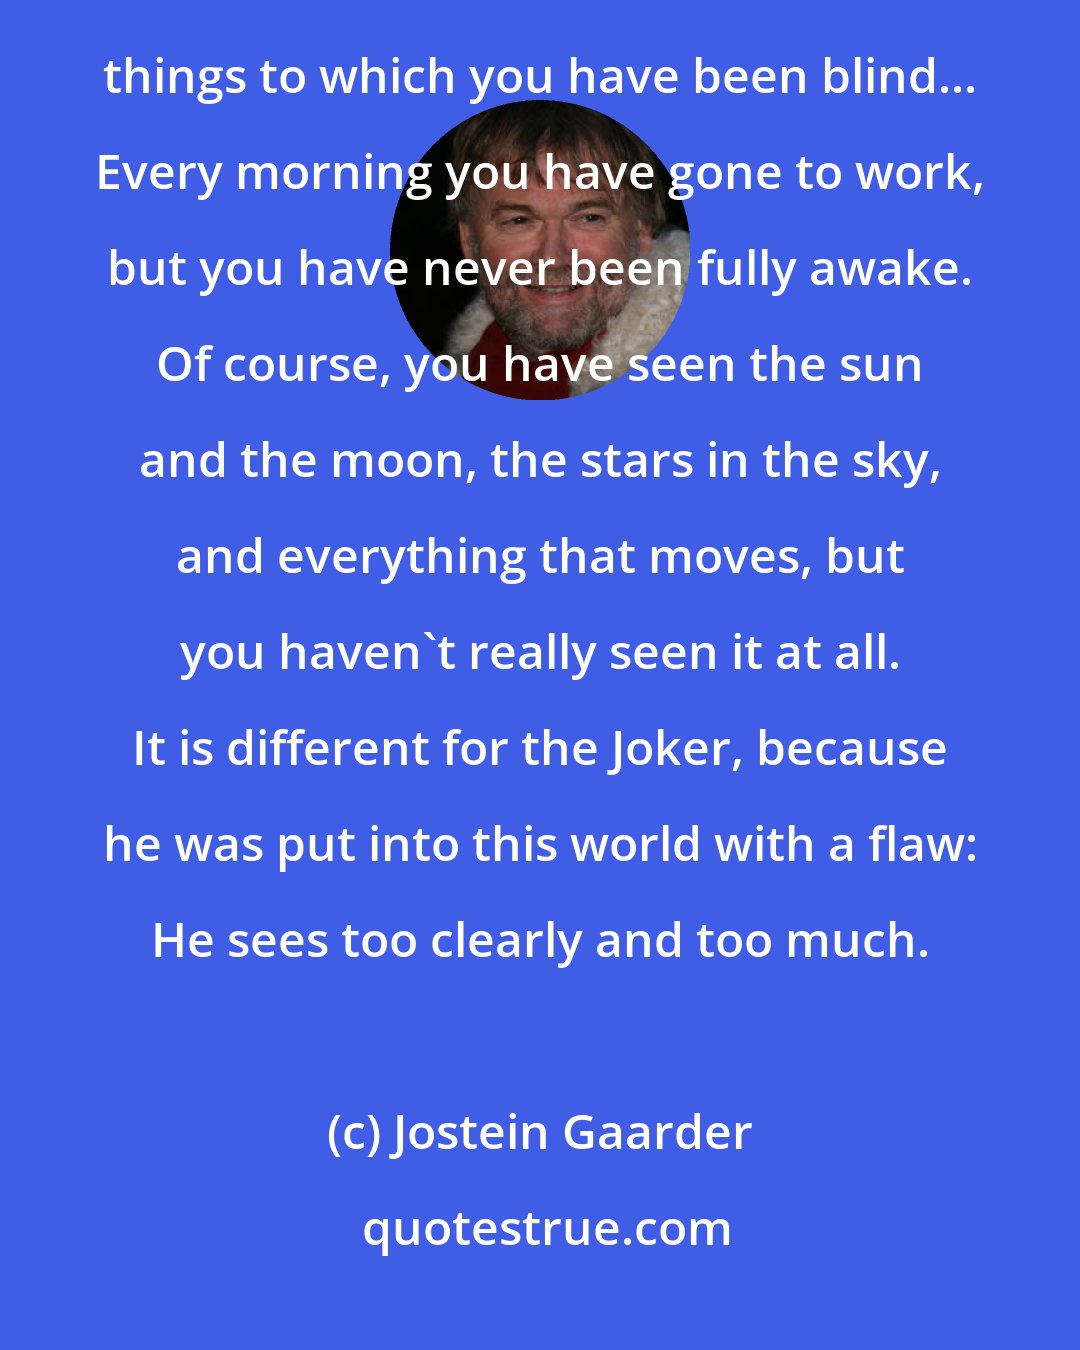 Jostein Gaarder: I have gone around observing your activities from the outside. Because of this I have also been able to see things to which you have been blind... Every morning you have gone to work, but you have never been fully awake. Of course, you have seen the sun and the moon, the stars in the sky, and everything that moves, but you haven't really seen it at all. It is different for the Joker, because he was put into this world with a flaw: He sees too clearly and too much.